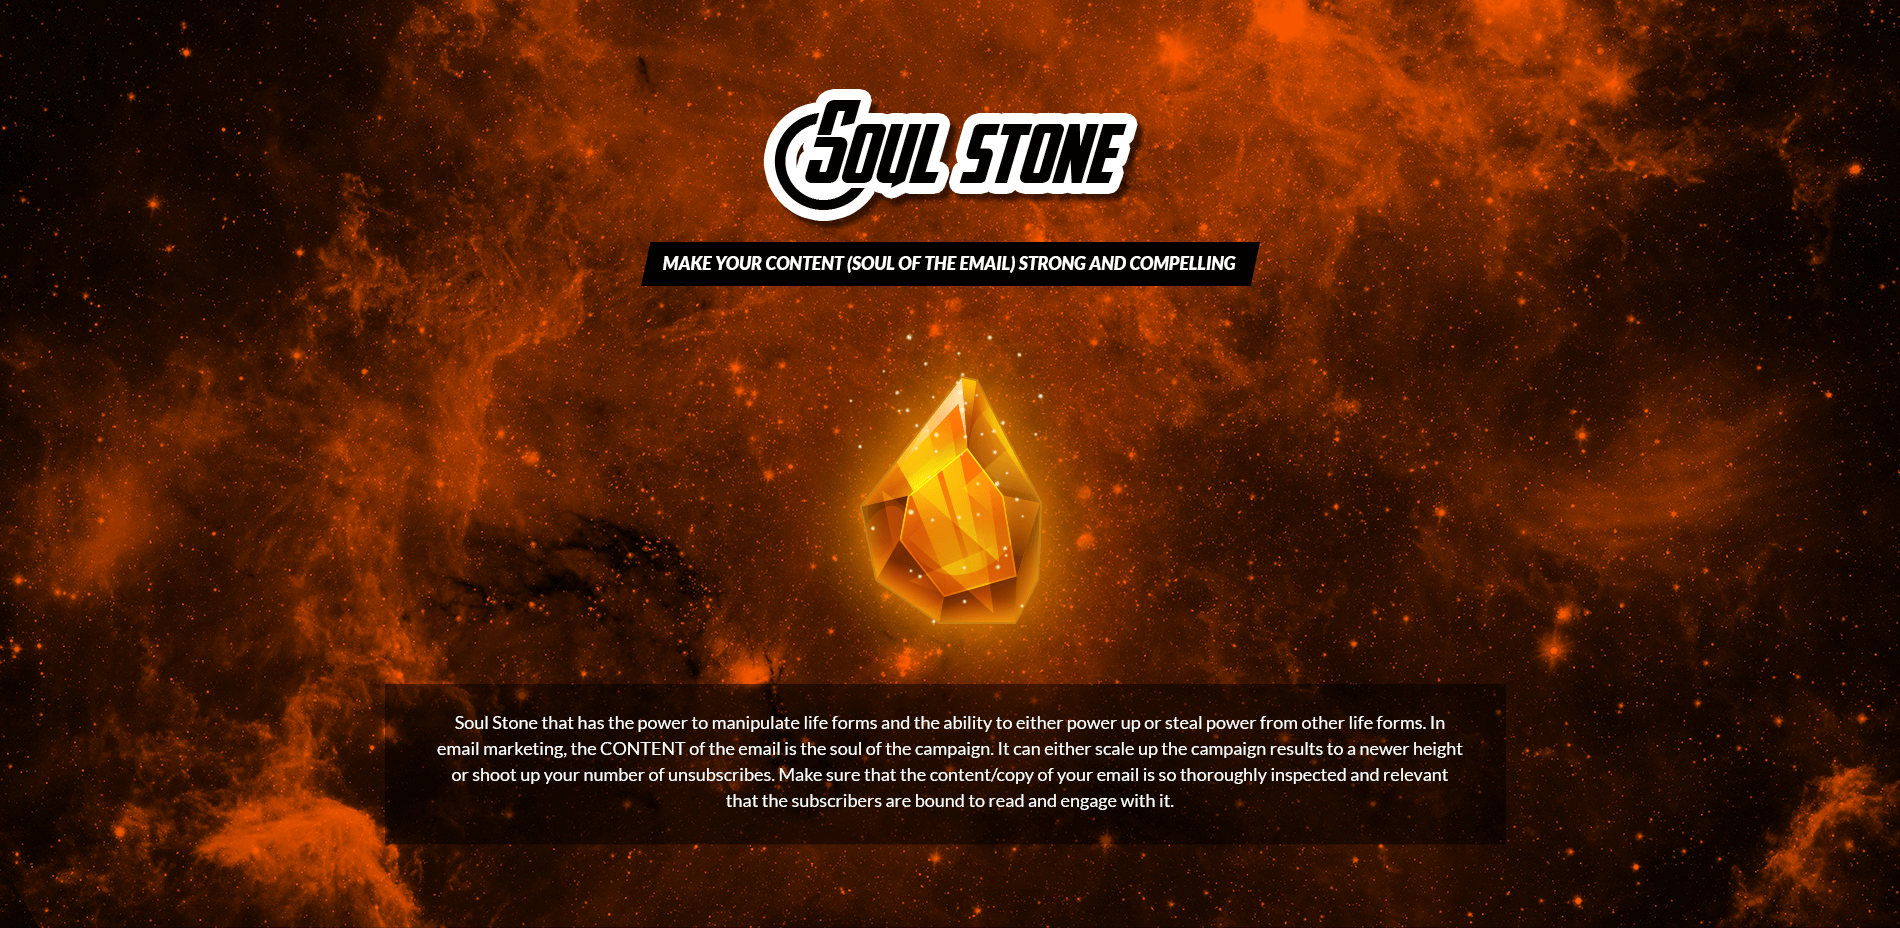 Soul Stone - Make your Content (Soul of the Email) Strong and Compelling
Soul Stone that has the power to manipulate life forms and the ability to either power up or steal power from other life forms. In email marketing, the CONTENT of the email is the soul of the campaign. It can either scale up the campaign results to a newer height or shoot up your number of unsubscribes. Make sure that the content/copy of your email is so thoroughly inspected and relevant that the subscribers are bound to read and engage with it.